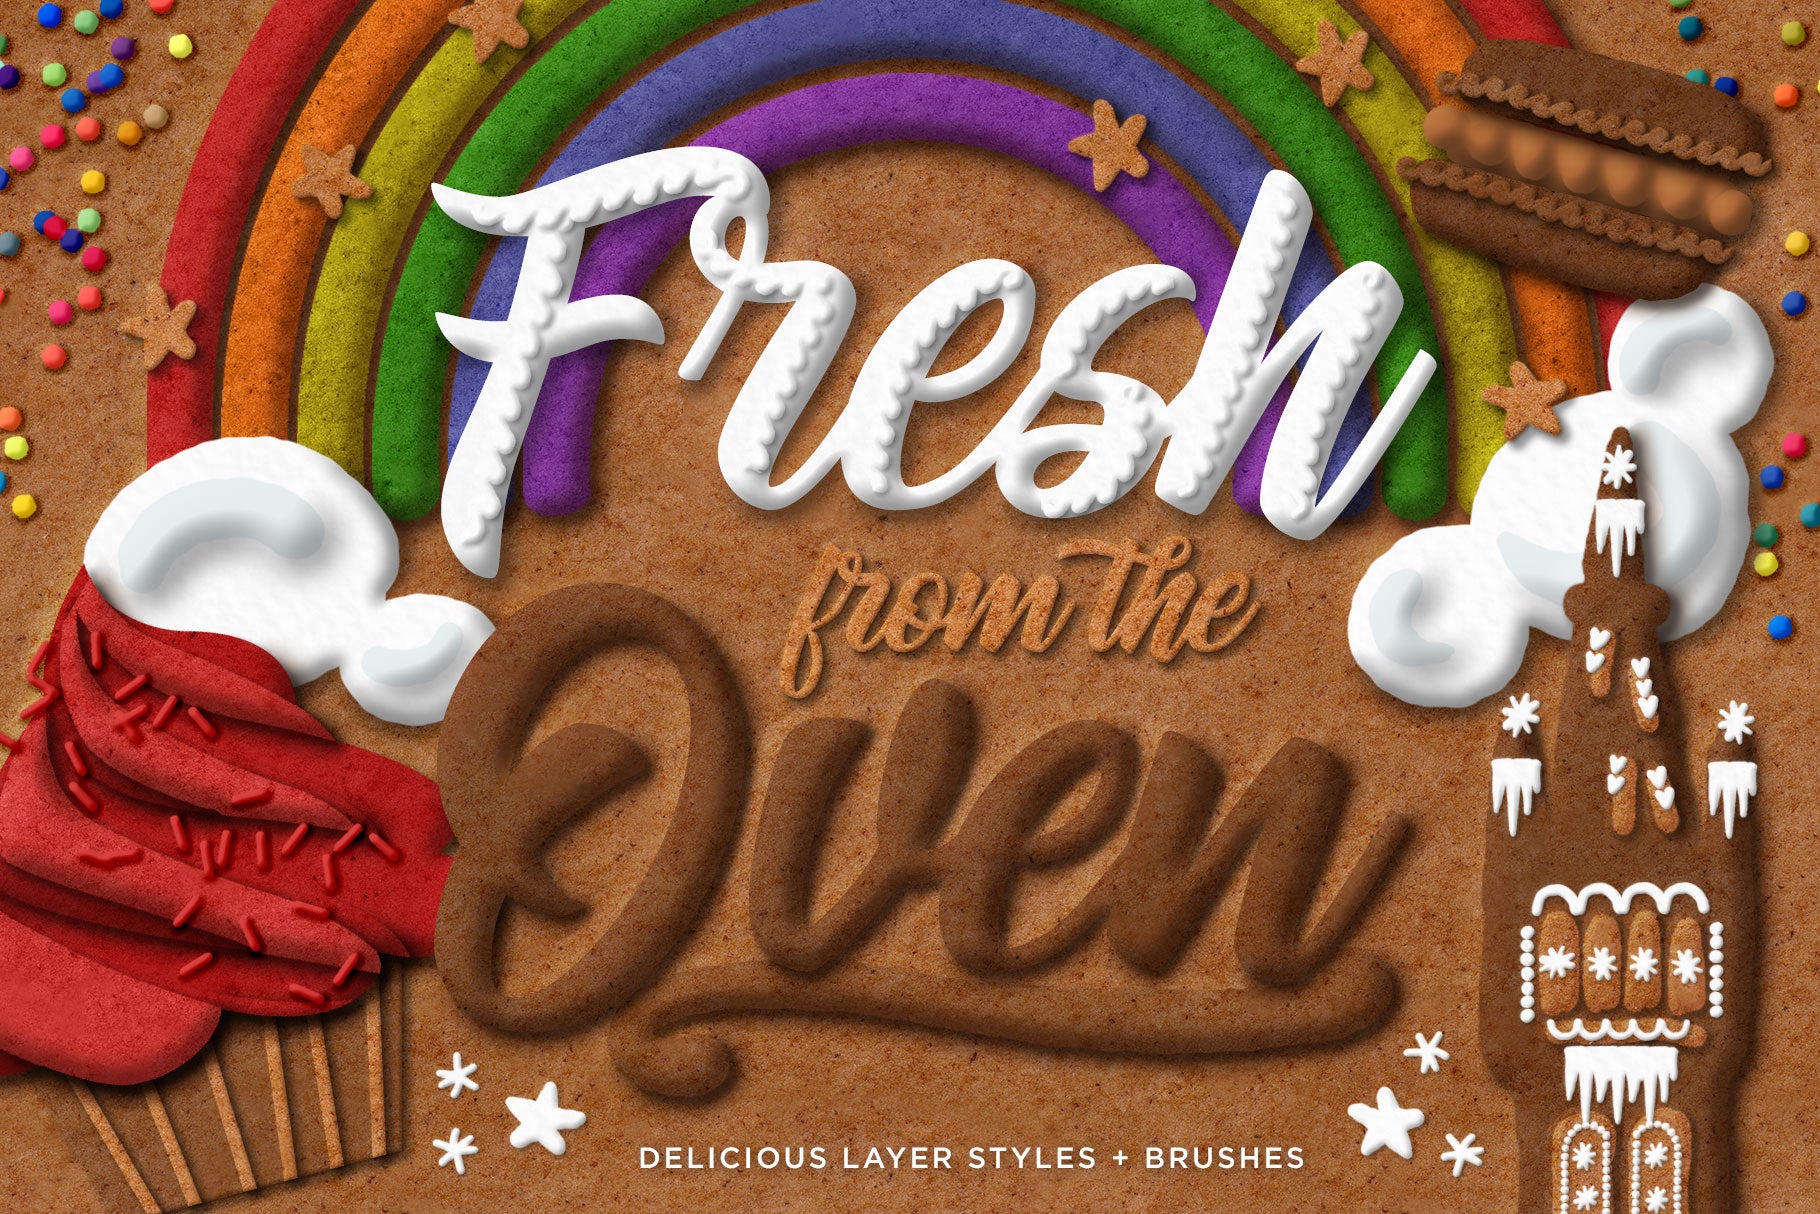 Gingerbread, Cookie, & Cake Graphic & Lettering Effects for Photoshop, cover image